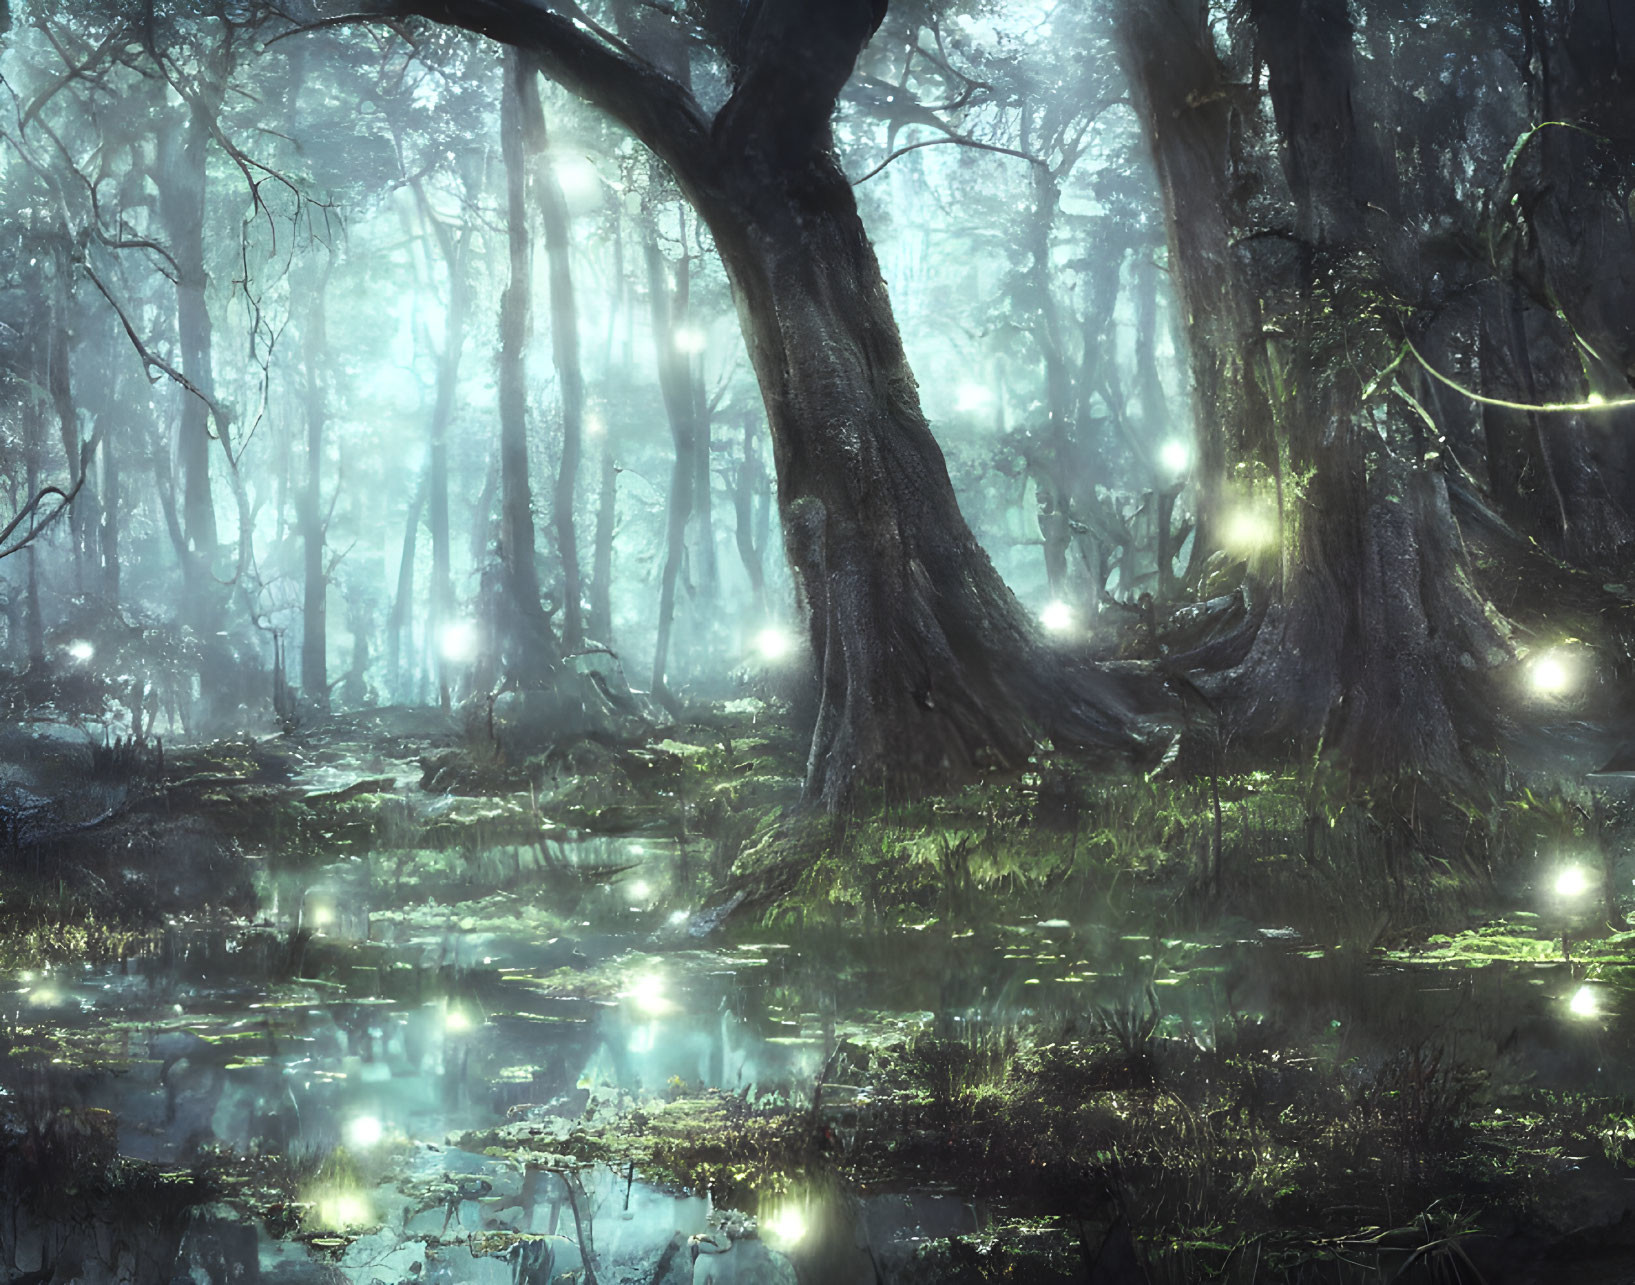 Enchanted Forest with Glowing Orbs, Ancient Trees, and Reflective Water